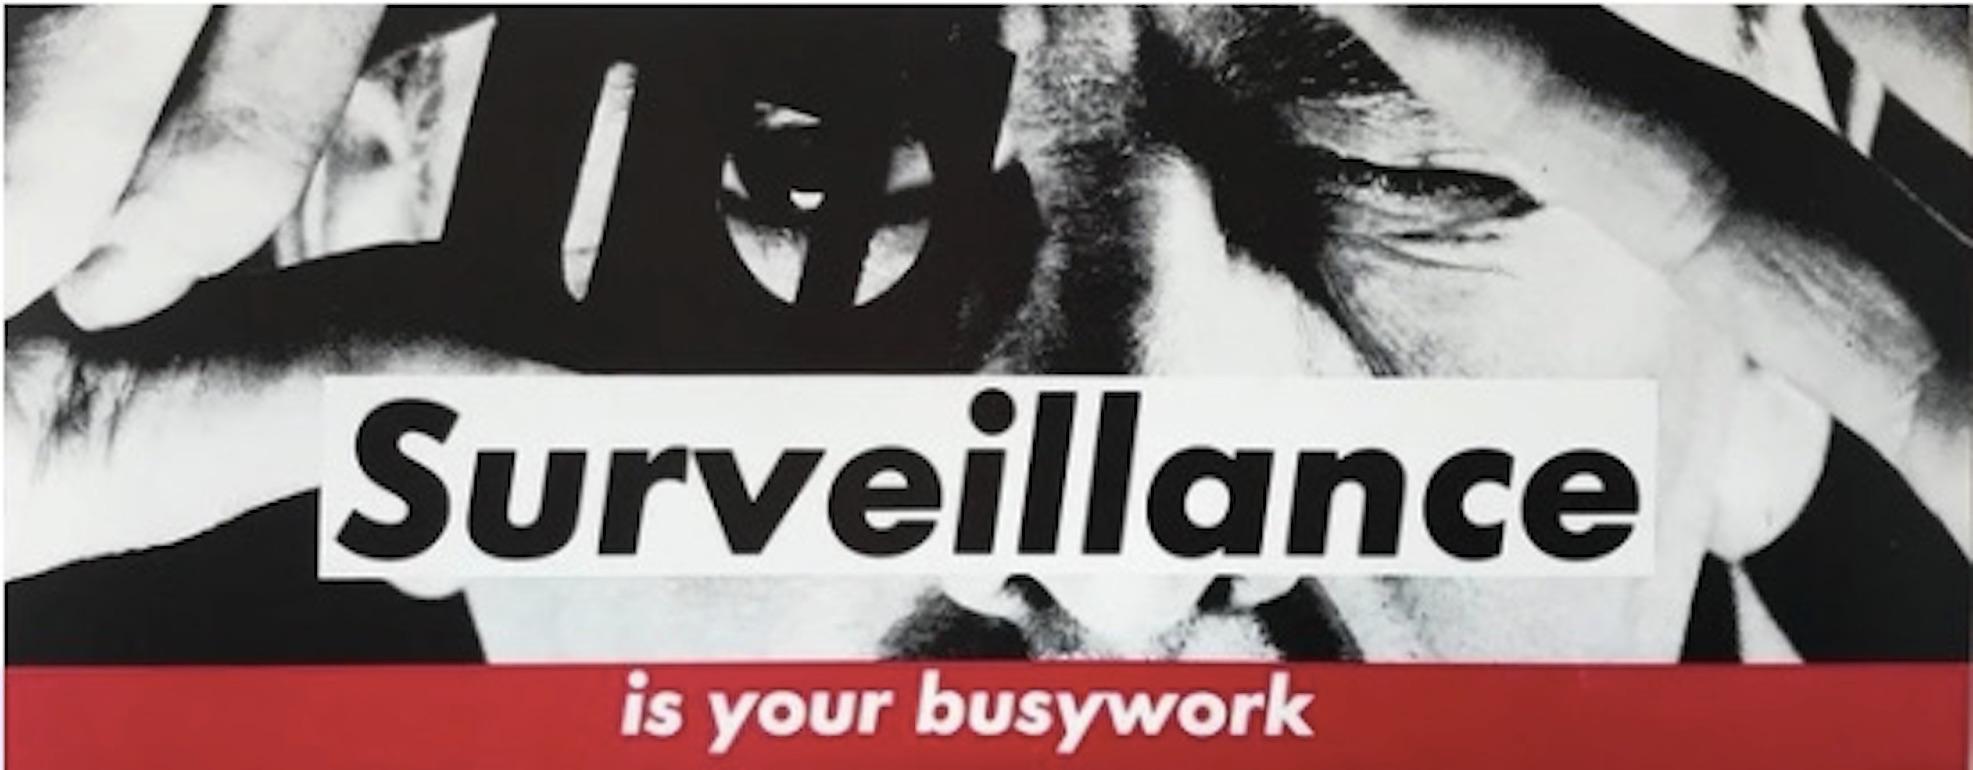 Barbara Kruger is one of the world’s distinctive and provocative artists, known for her hybridized mass-media and text collages. 

In 1970s New York, Barbara Kruger began her career in the advertising world. Shortly after she would change